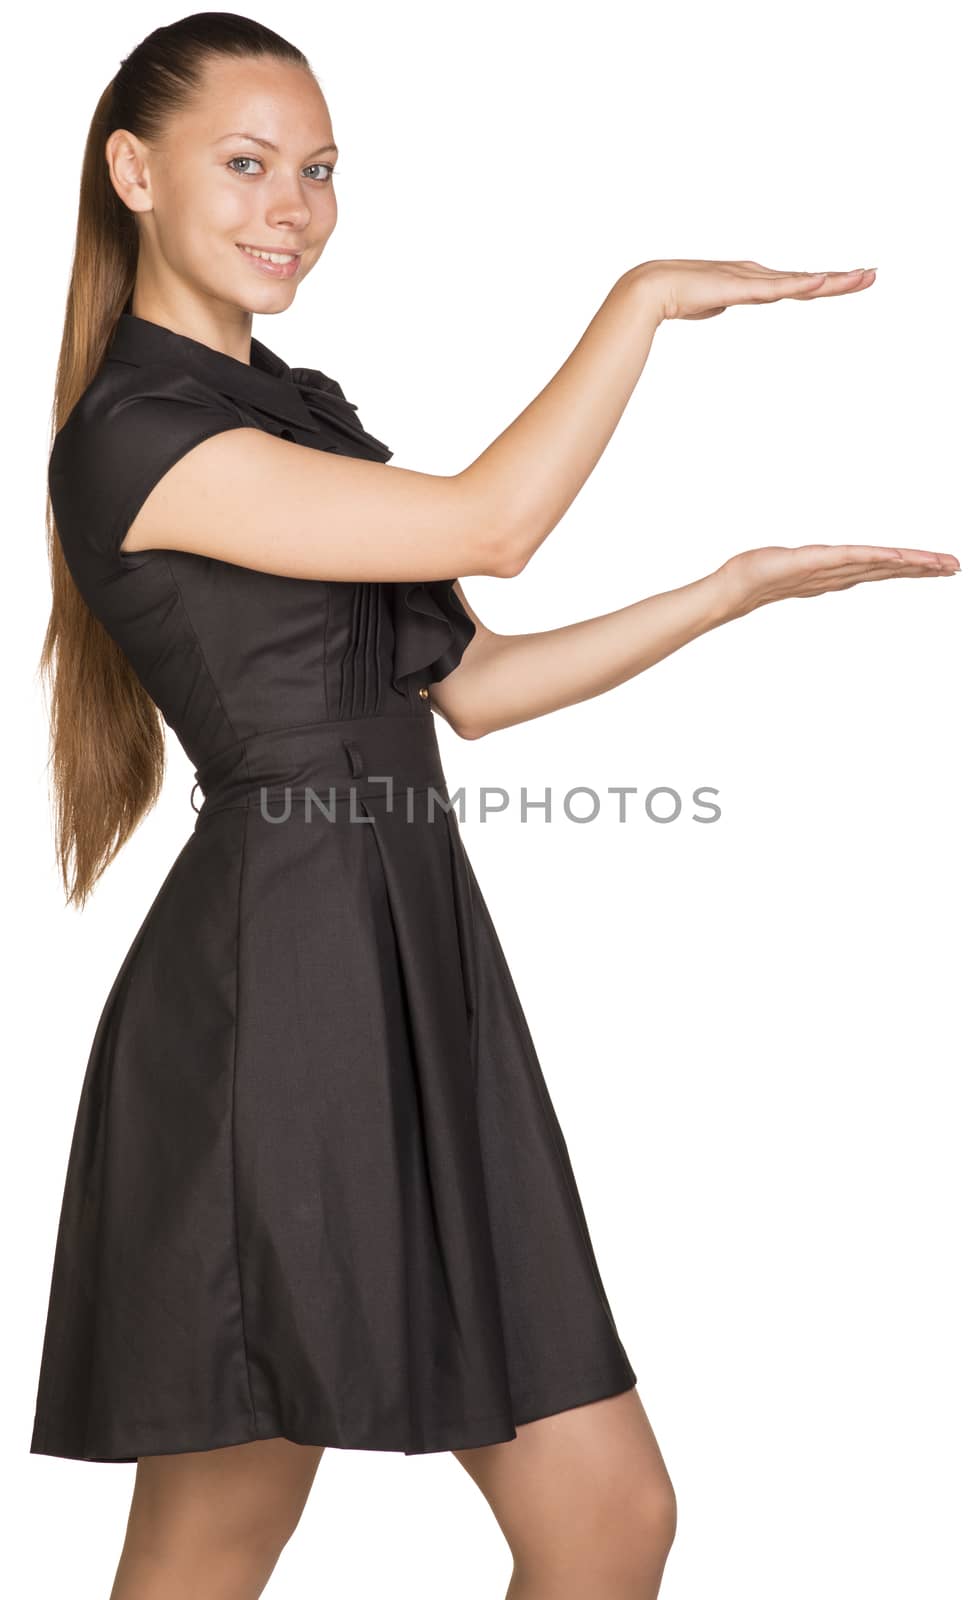 Young beautiful happy woman holding small imaginary object between two hands. Isolated